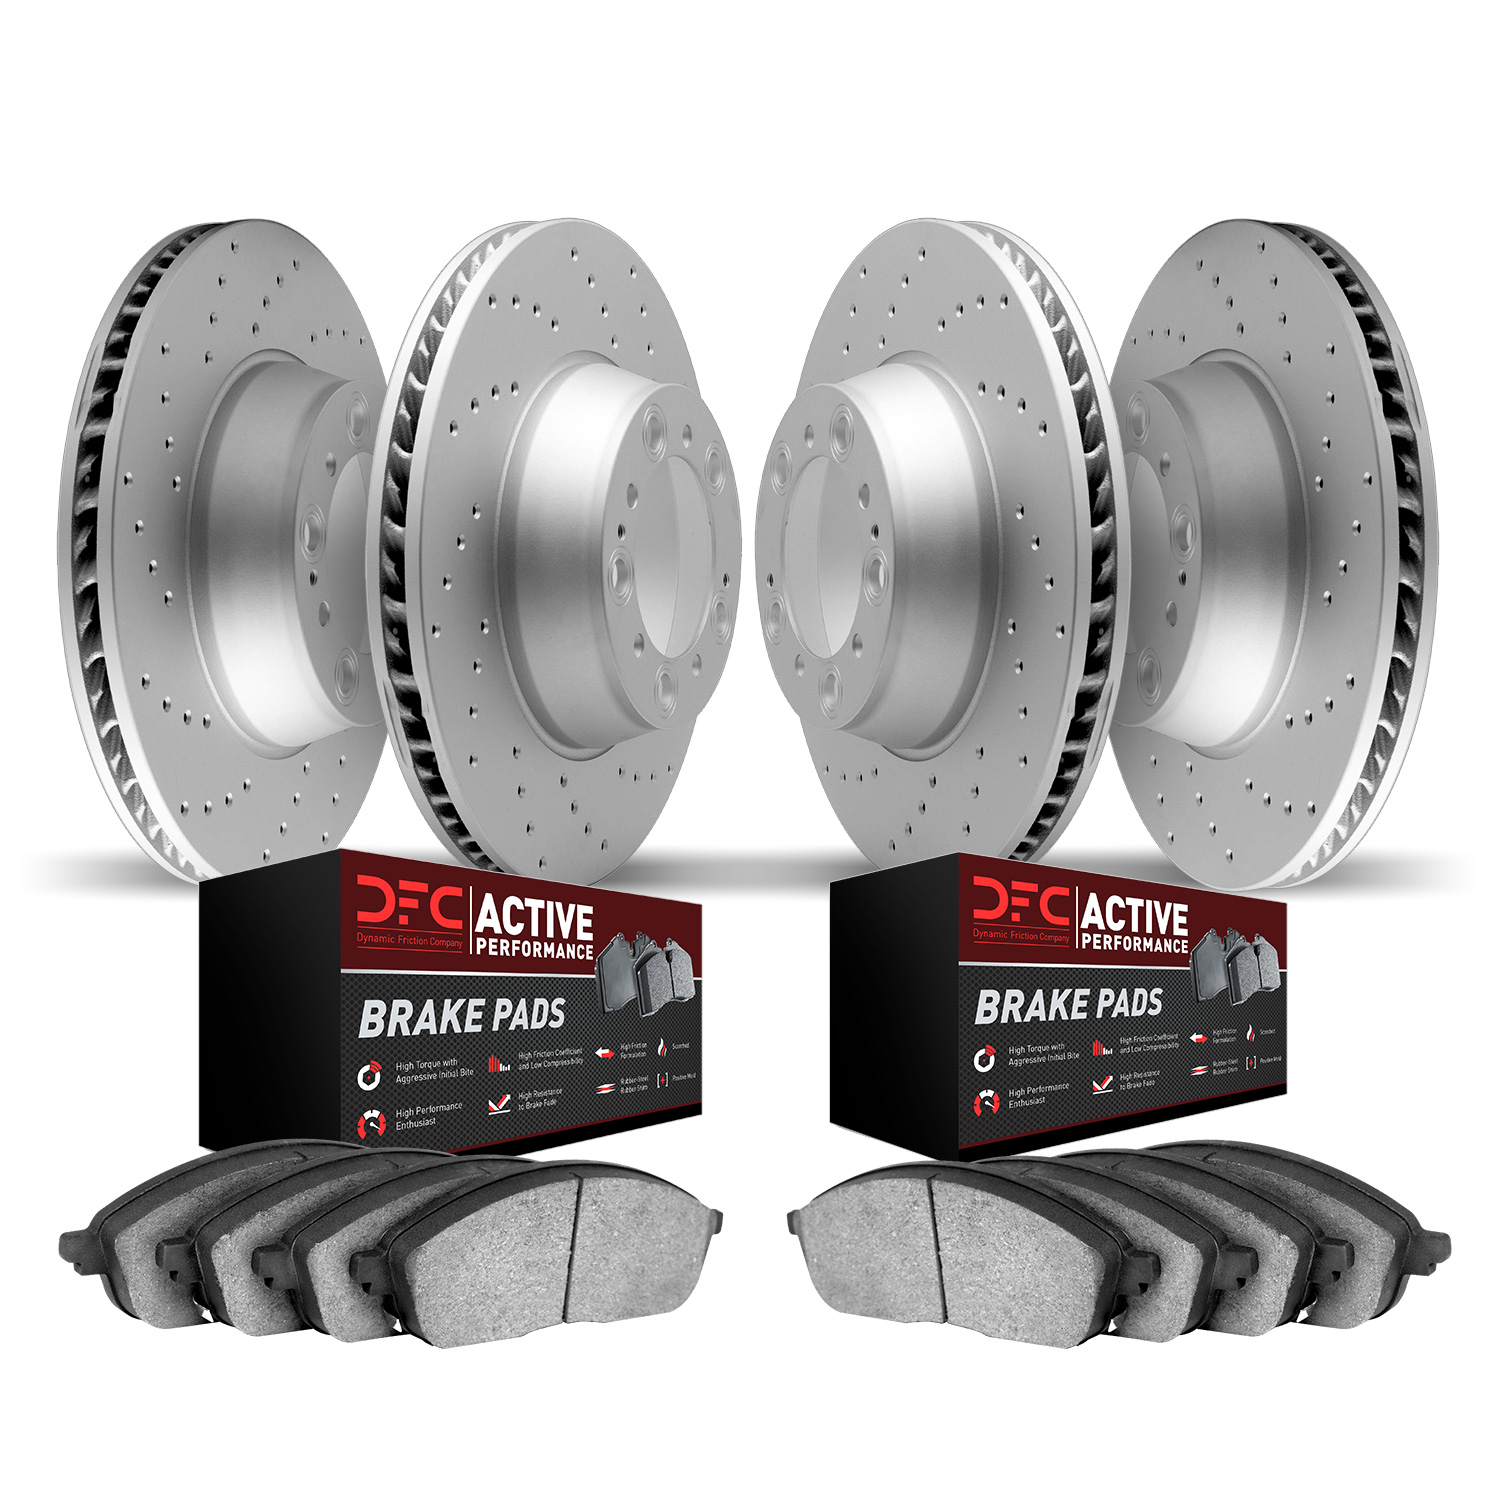 2704-74009 Geoperformance Drilled Brake Rotors with Active Performance Pads Kit, 2004-2006 Audi/Volkswagen, Position: Front and